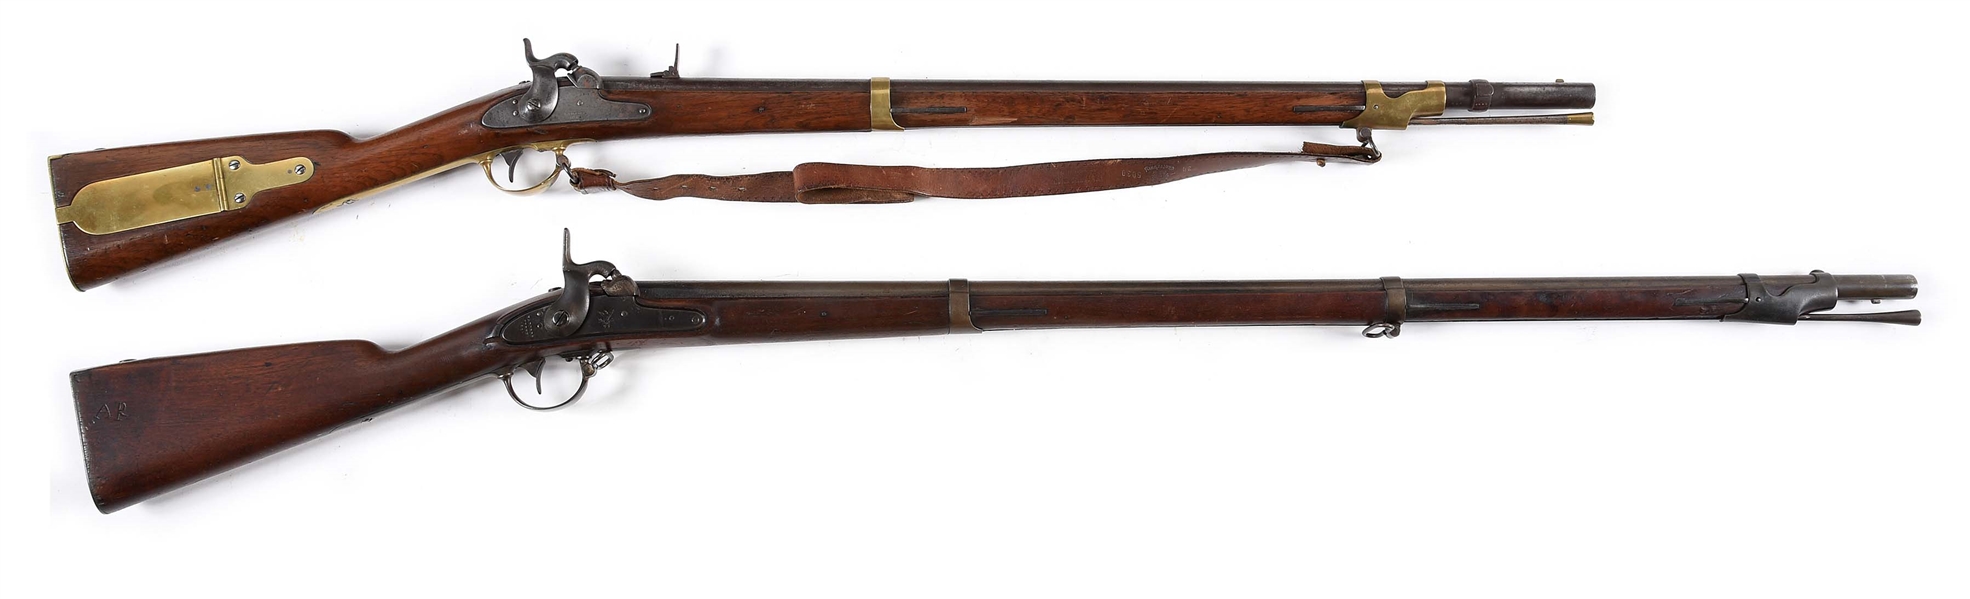 (A) LOT OF 2: E.WHITNEY MISSISSIPPI RIFLE AND HARPERS FERRY 1851 PERCUSSION RIFLES.